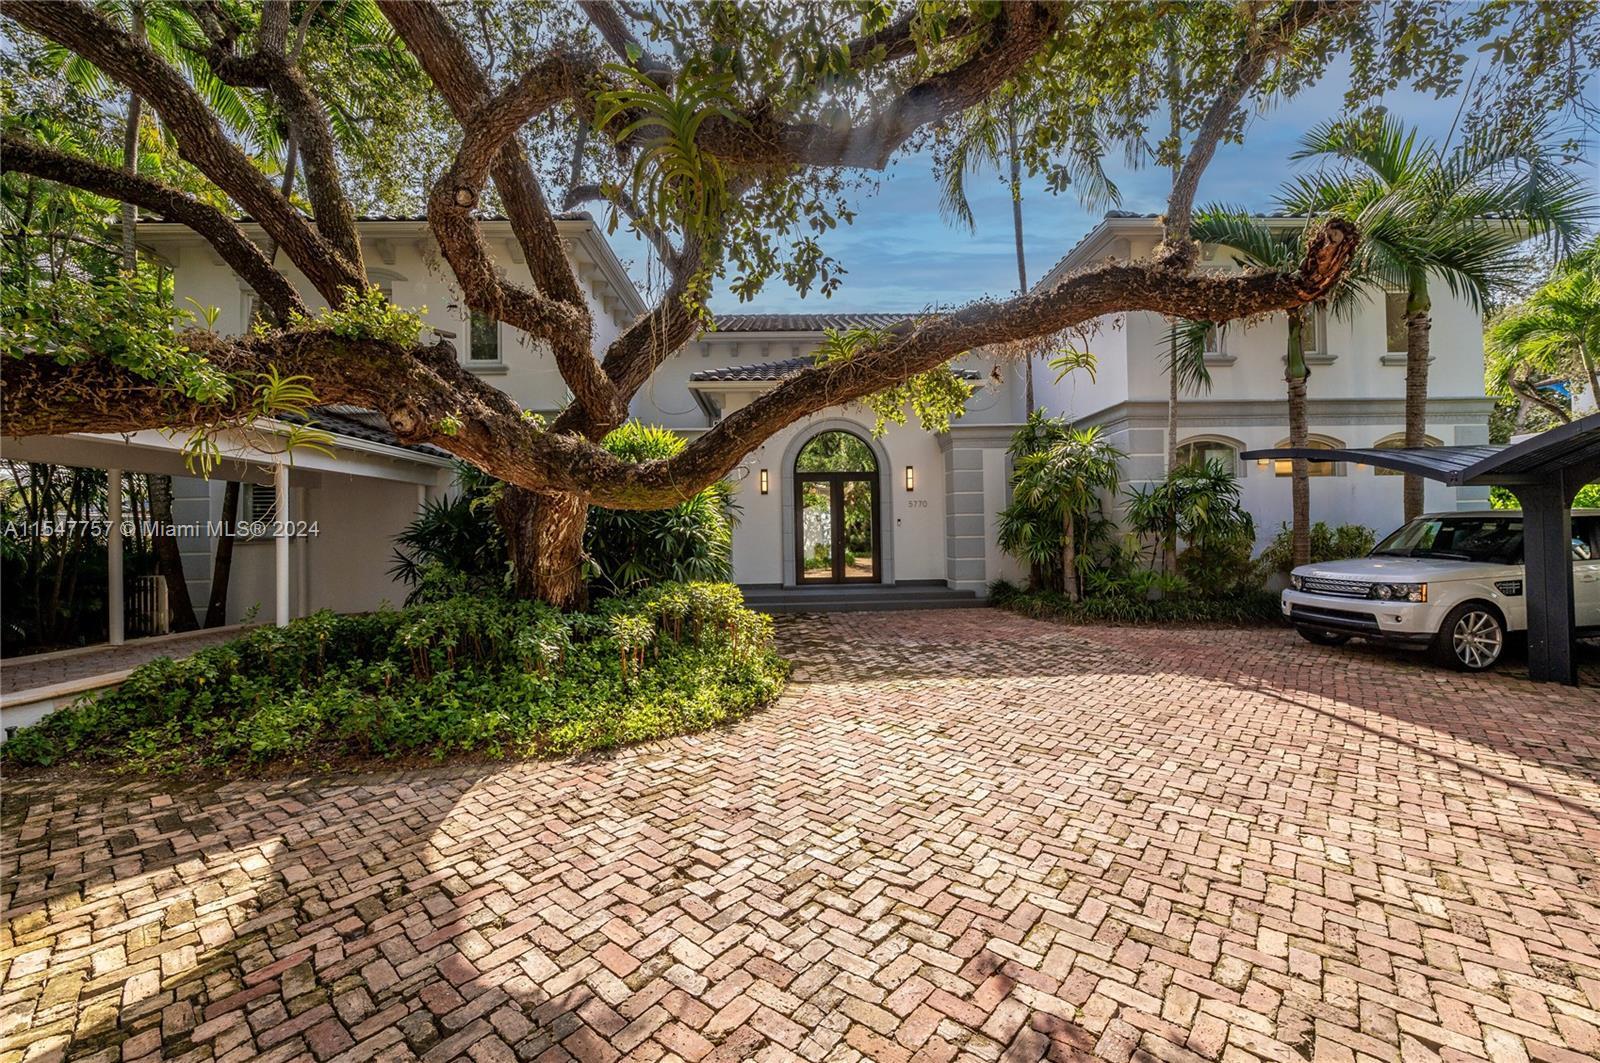 Mediterranean gem, ideally located on a private street, in the beautiful gated community of Palms Es